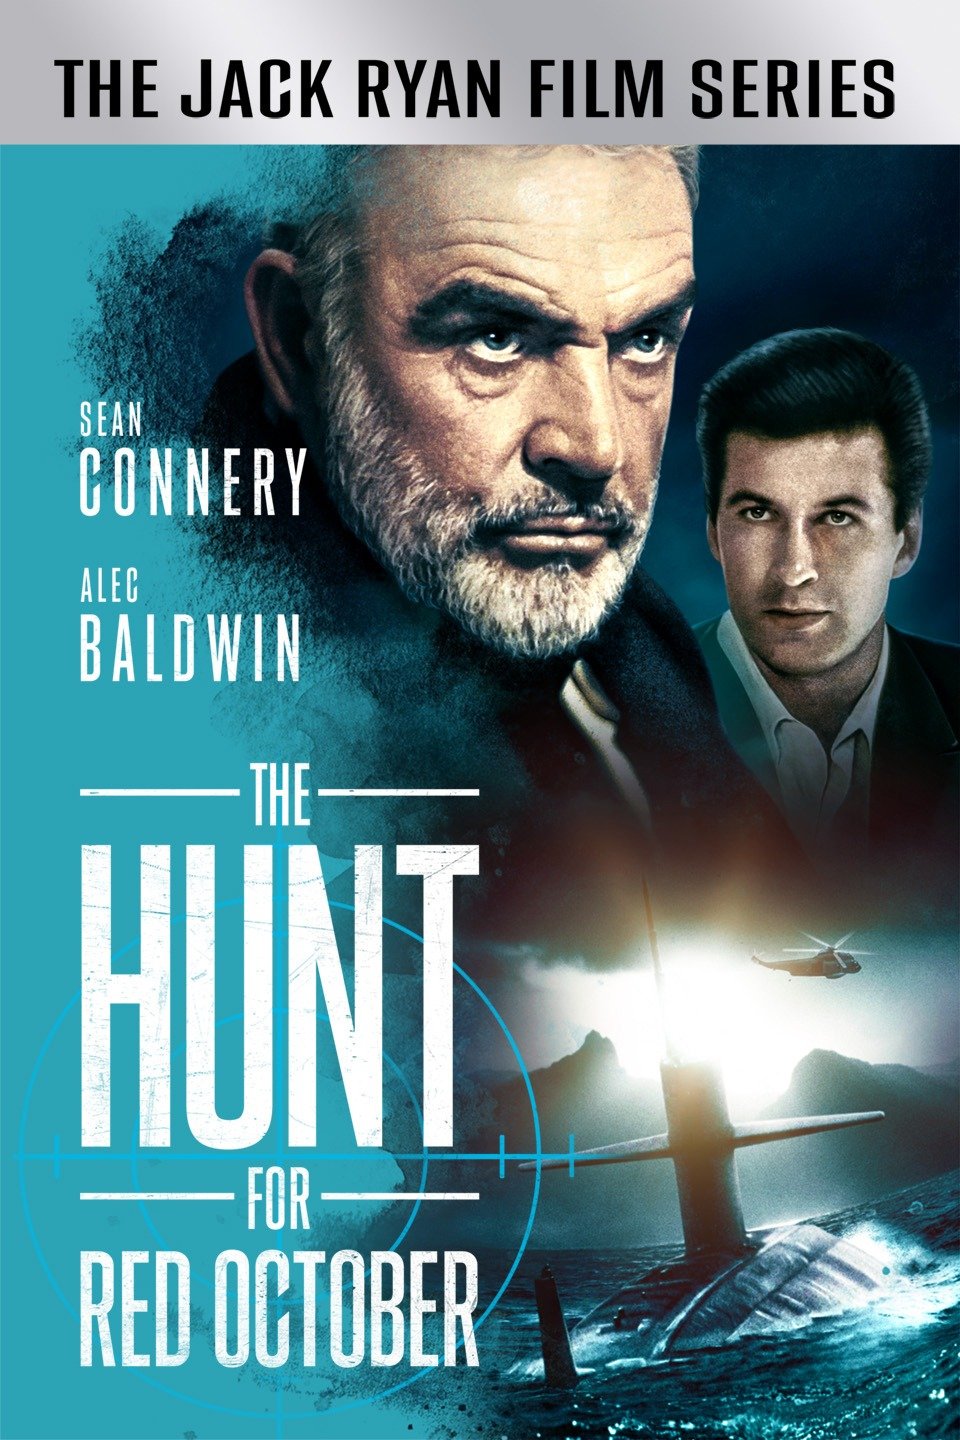 the hunt for red october book